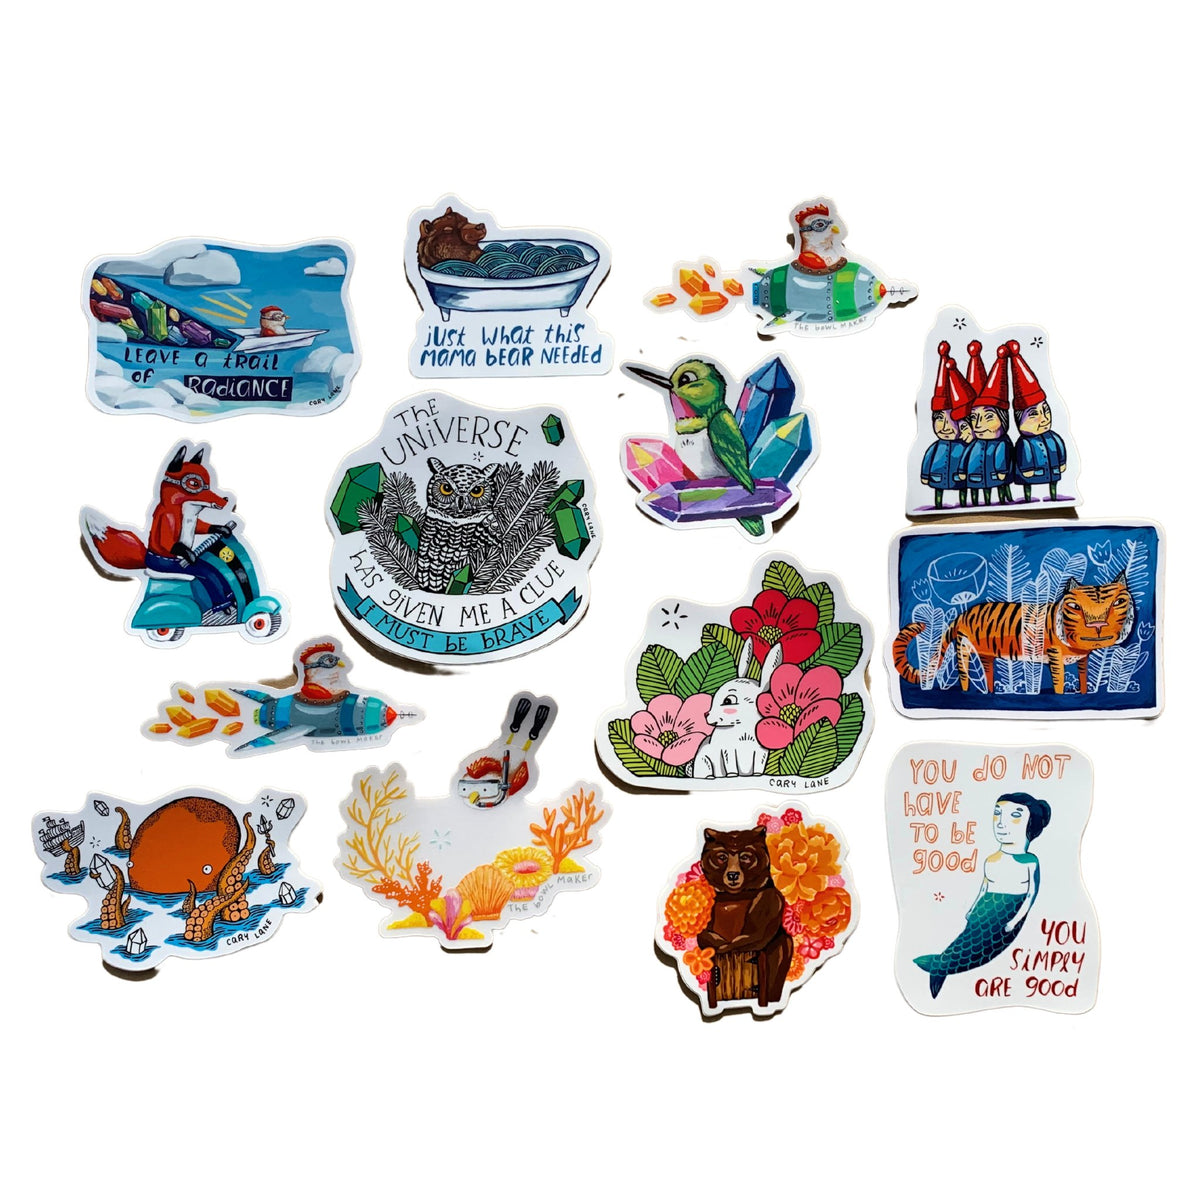 Sticker Collection from The Bowl Maker by Cary Lane